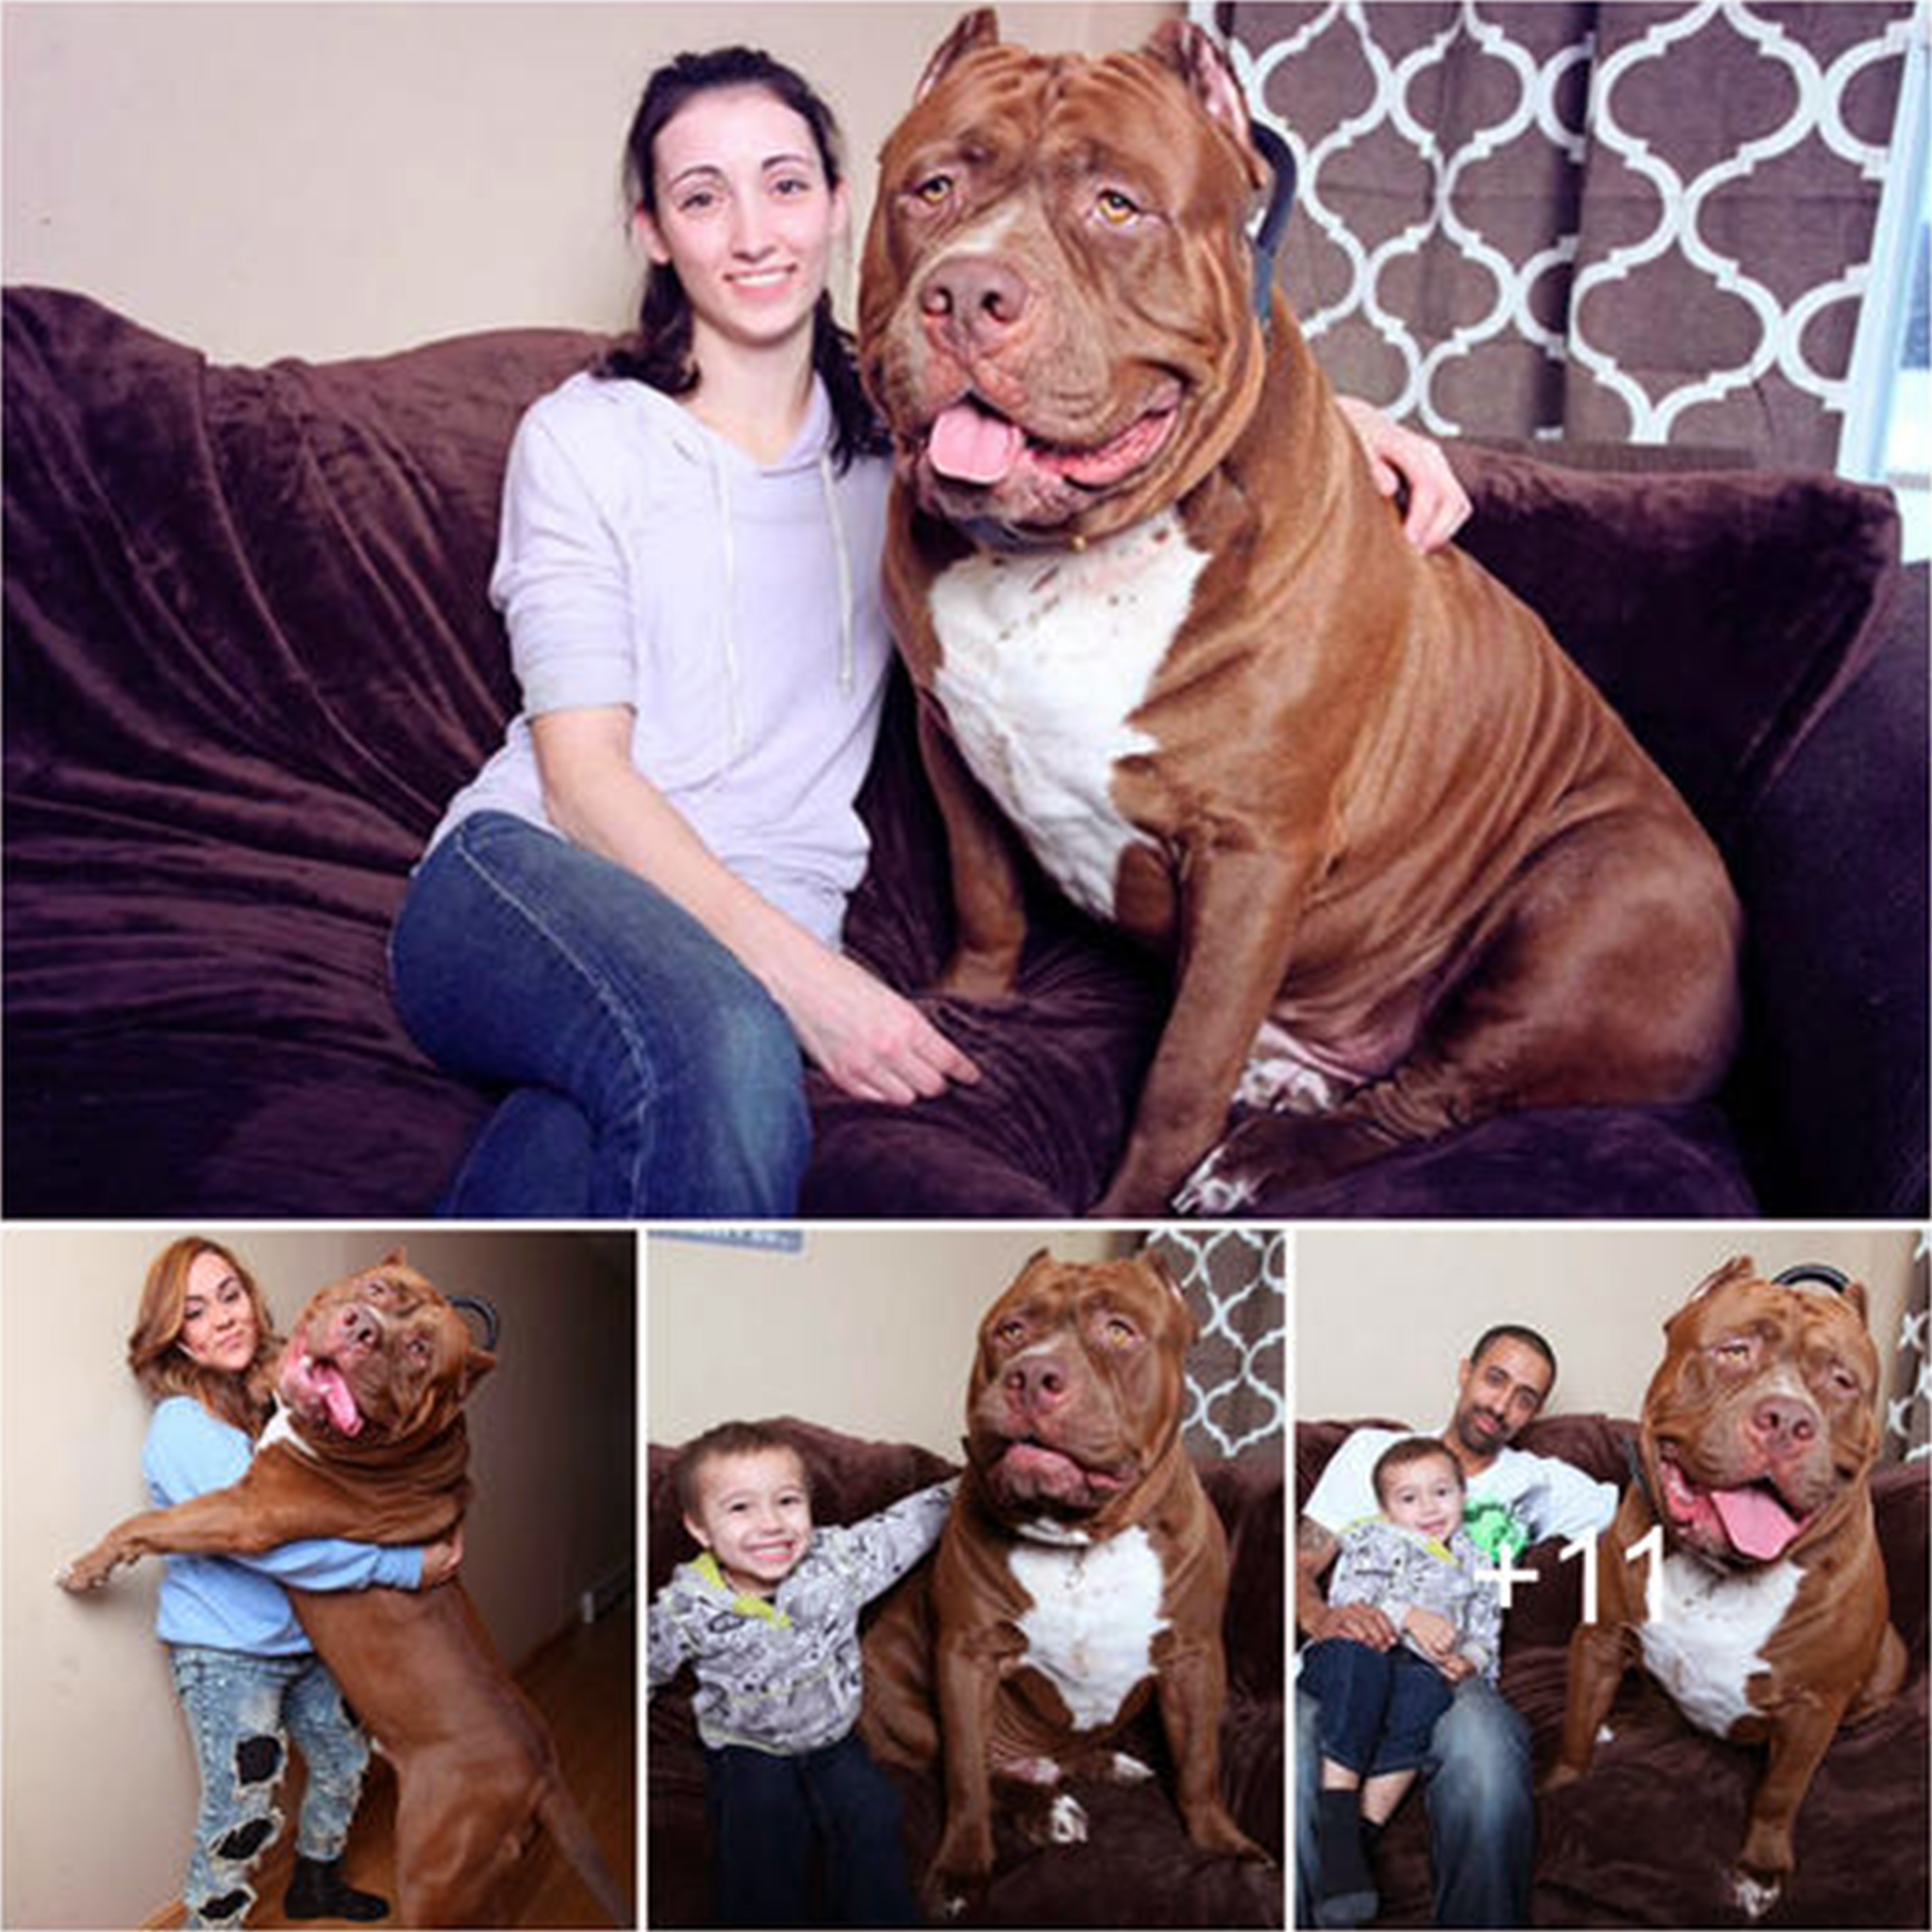 “Unleash the Beast: Meet HULK, the World’s Largest Pit Bull That Keeps Growing!”